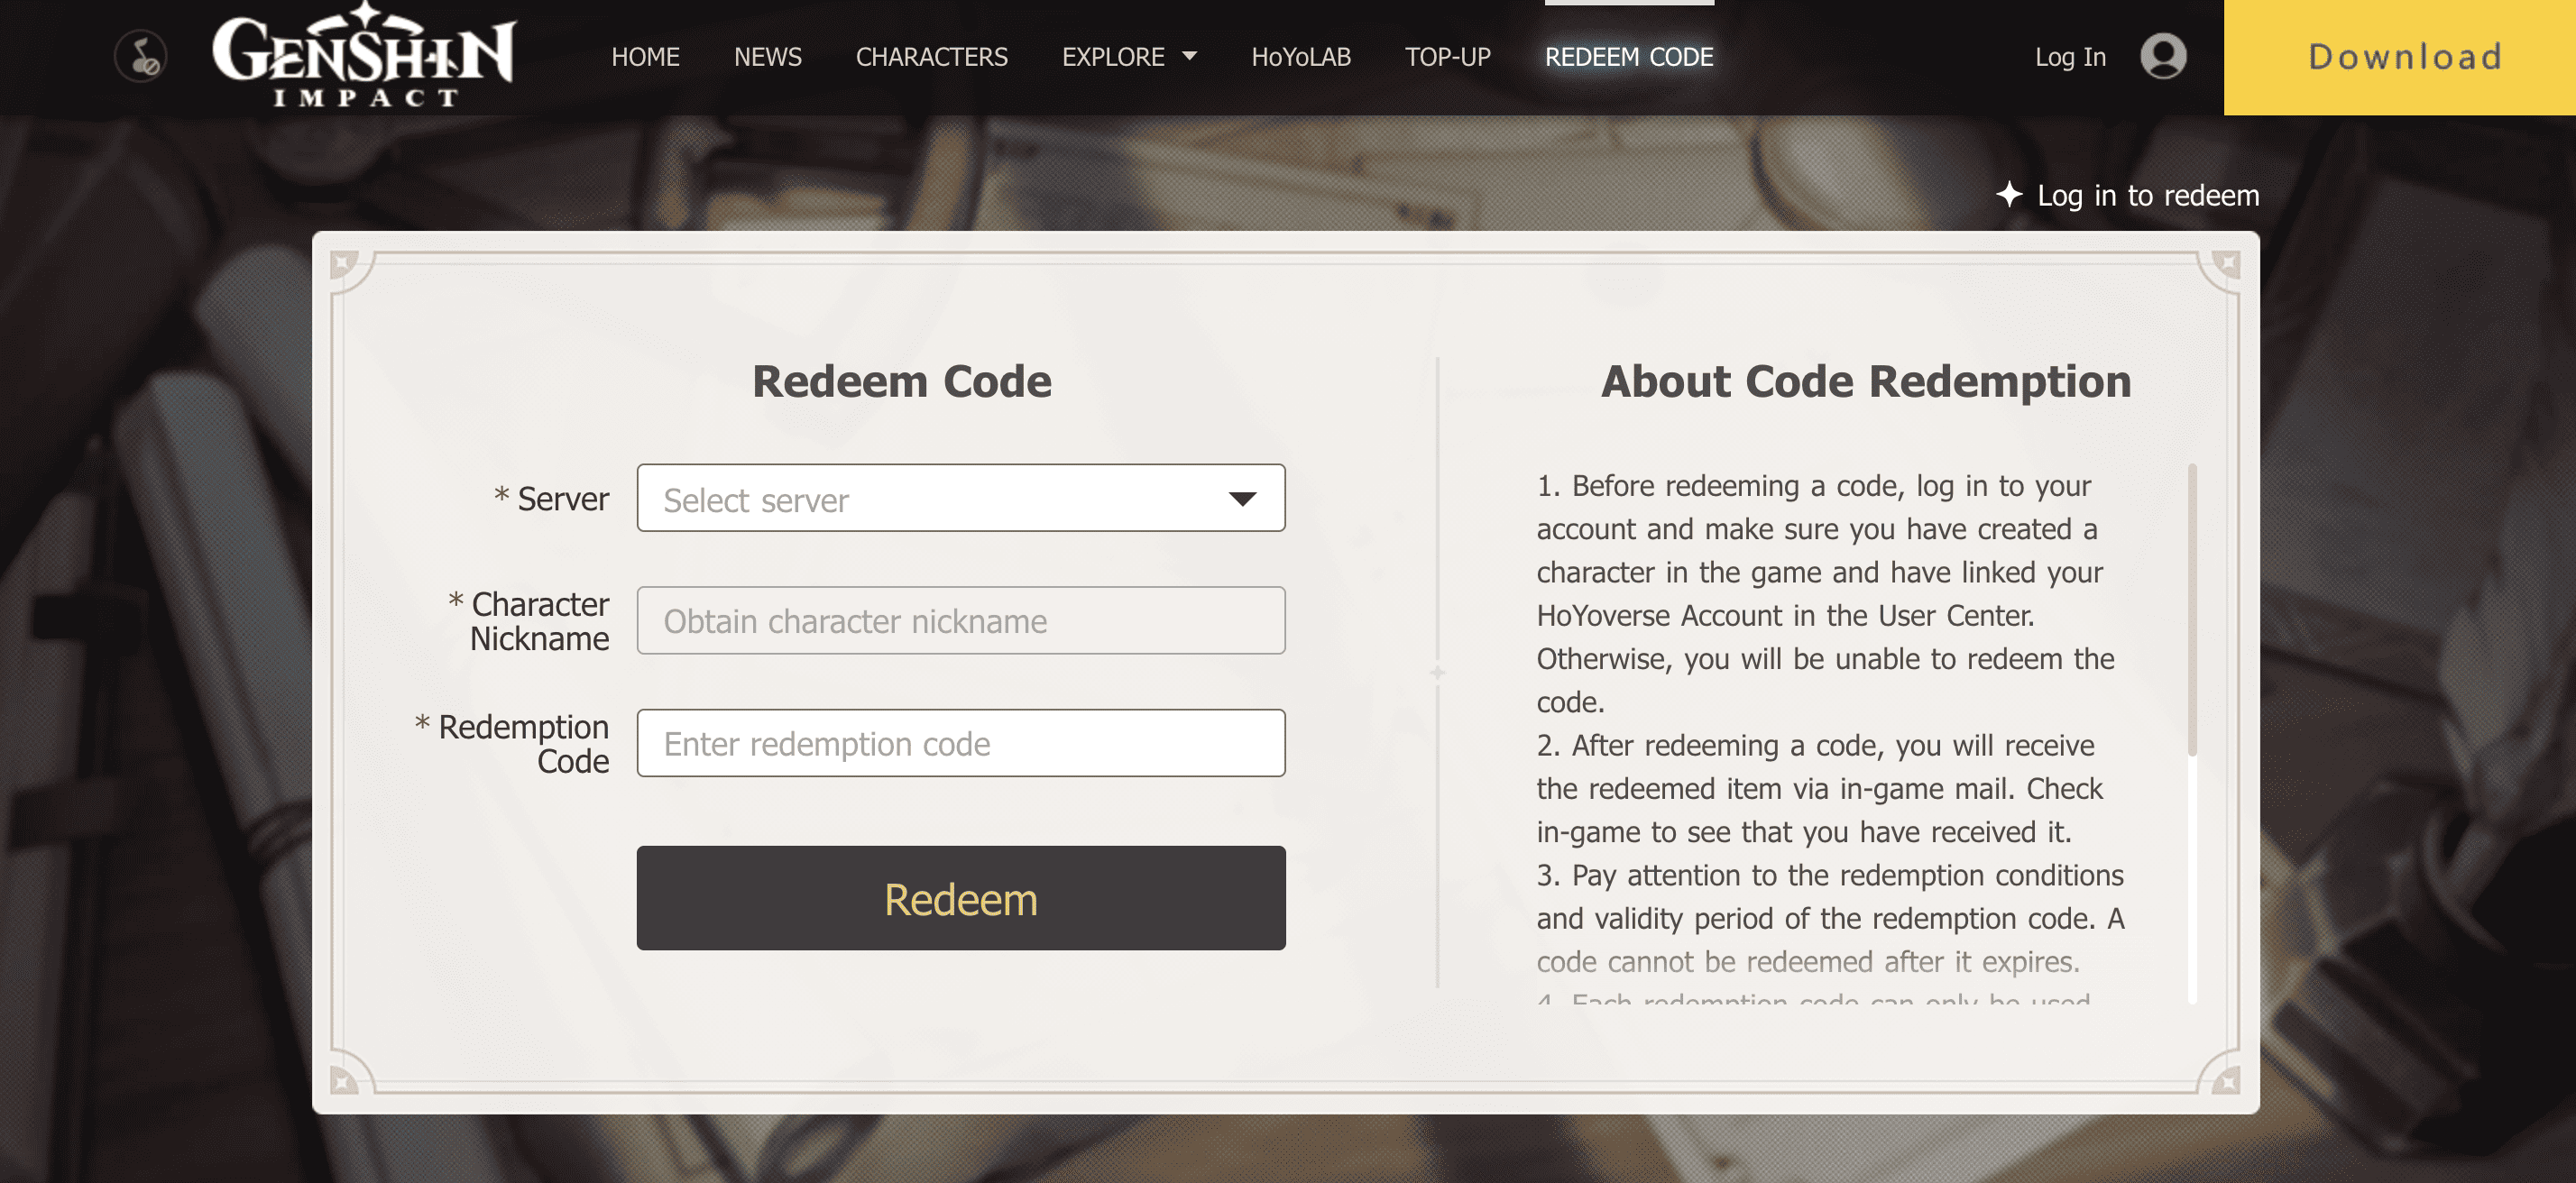 Screenshot showing how to redeem codes in Genshin Impact using the website.